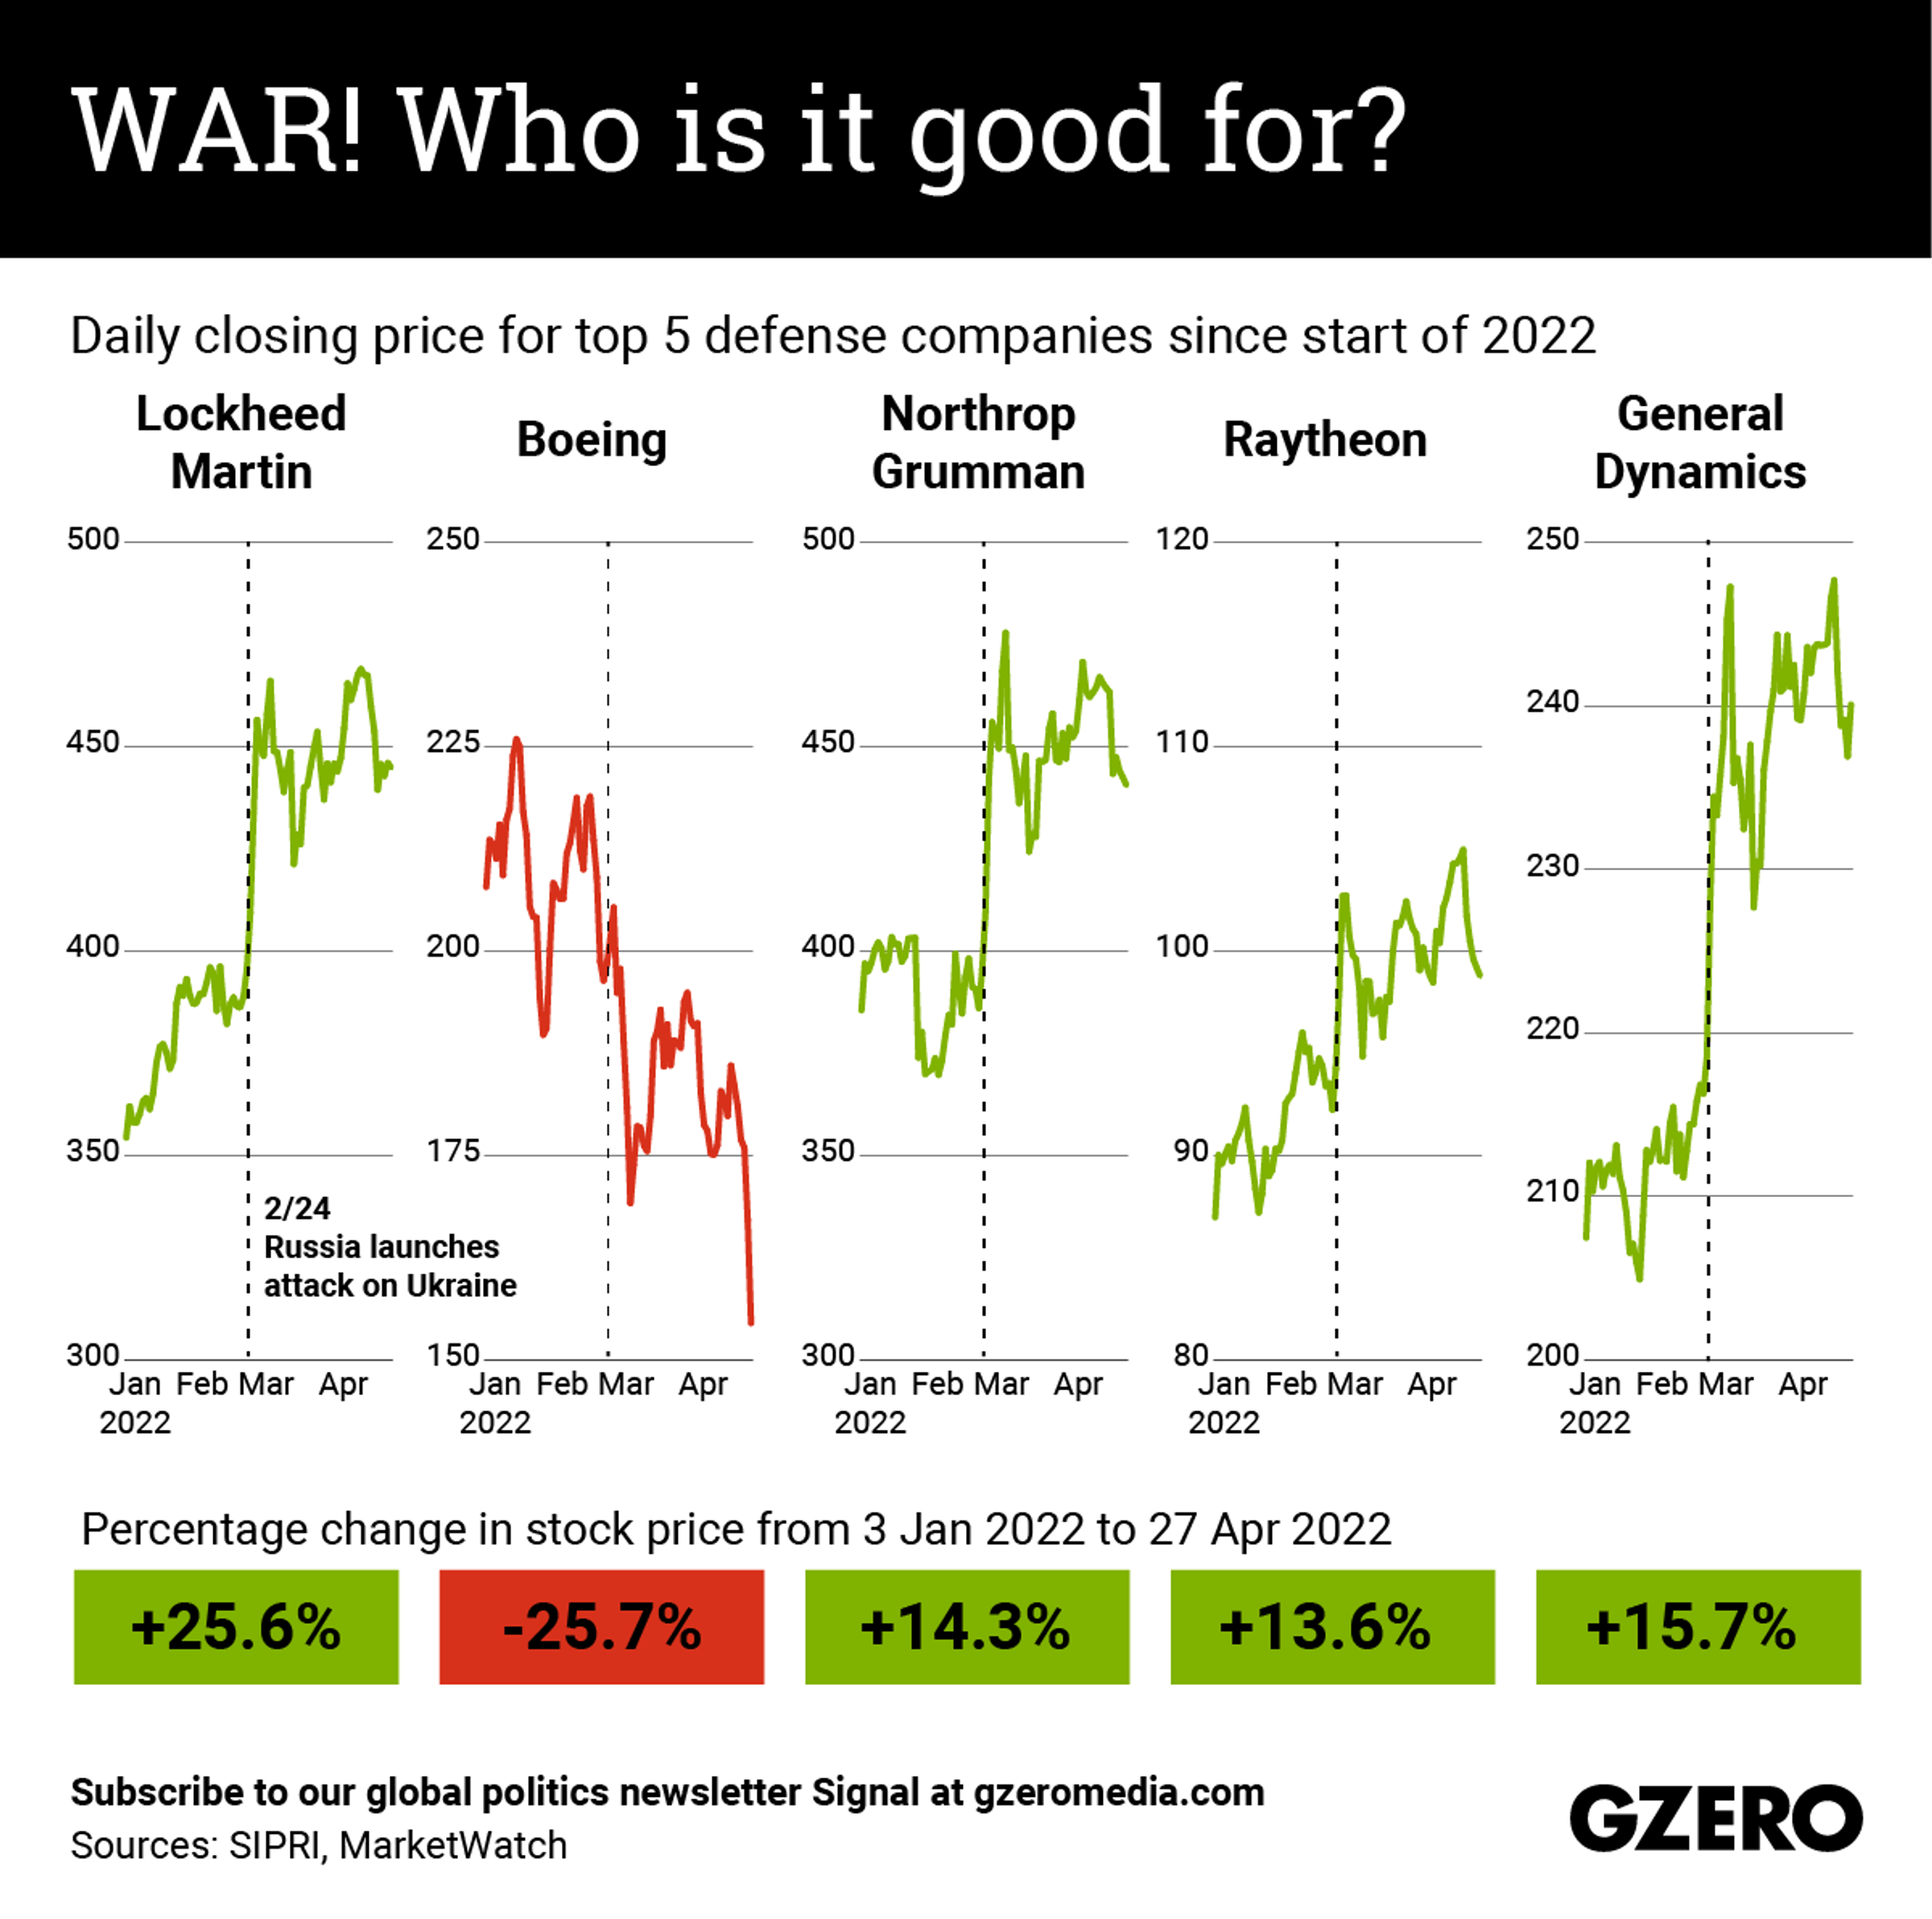 The Graphic Truth — WAR! Who is it good for? 